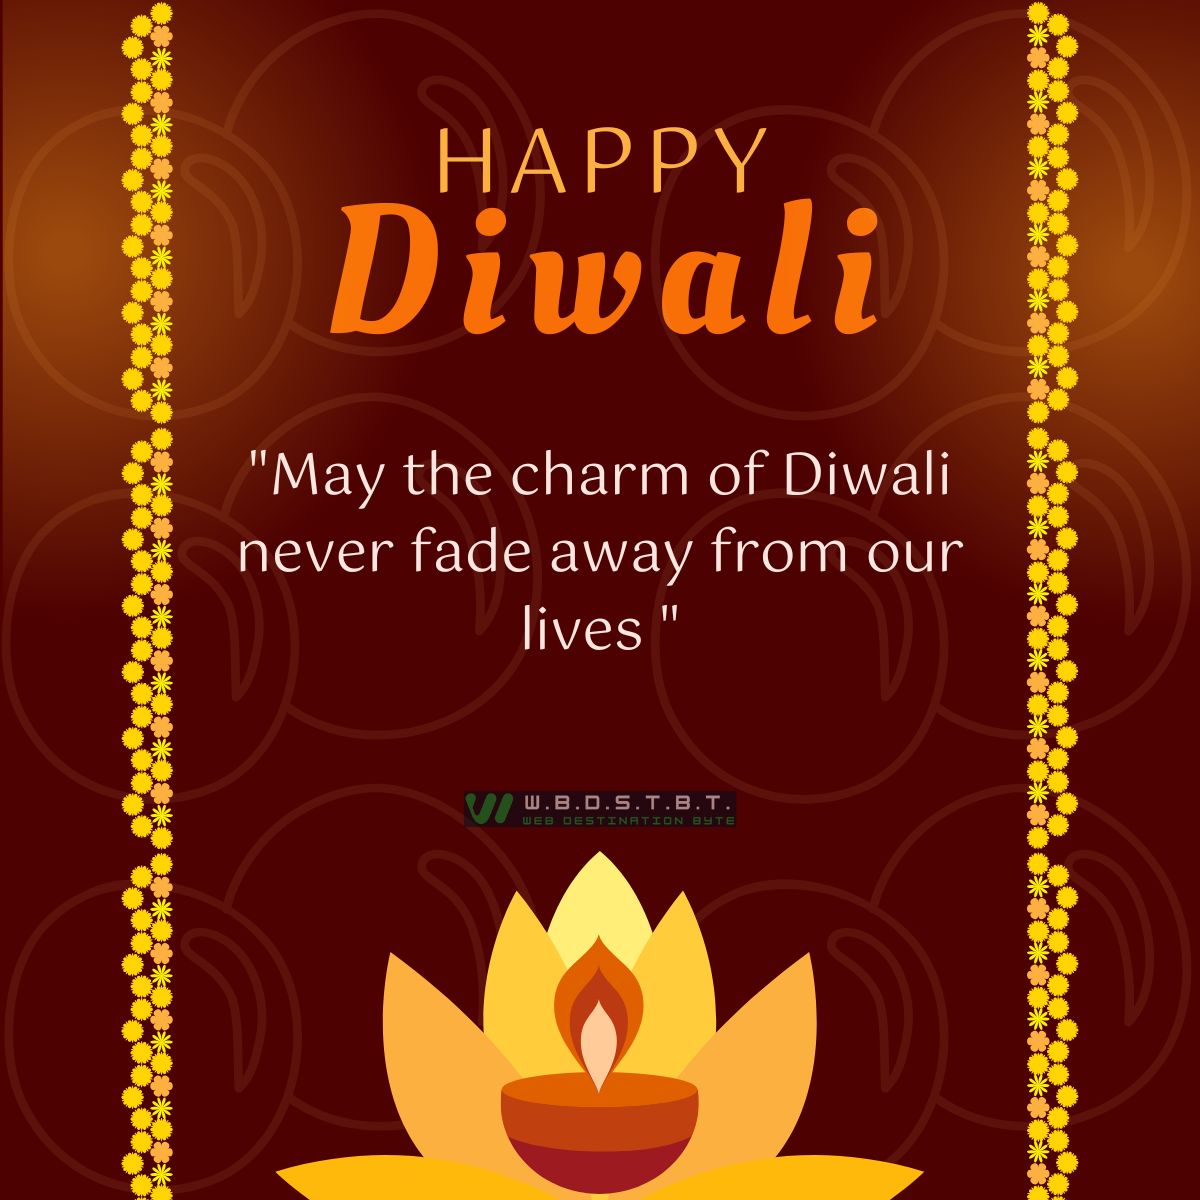 "May the charm of Diwali never fade away from our lives "